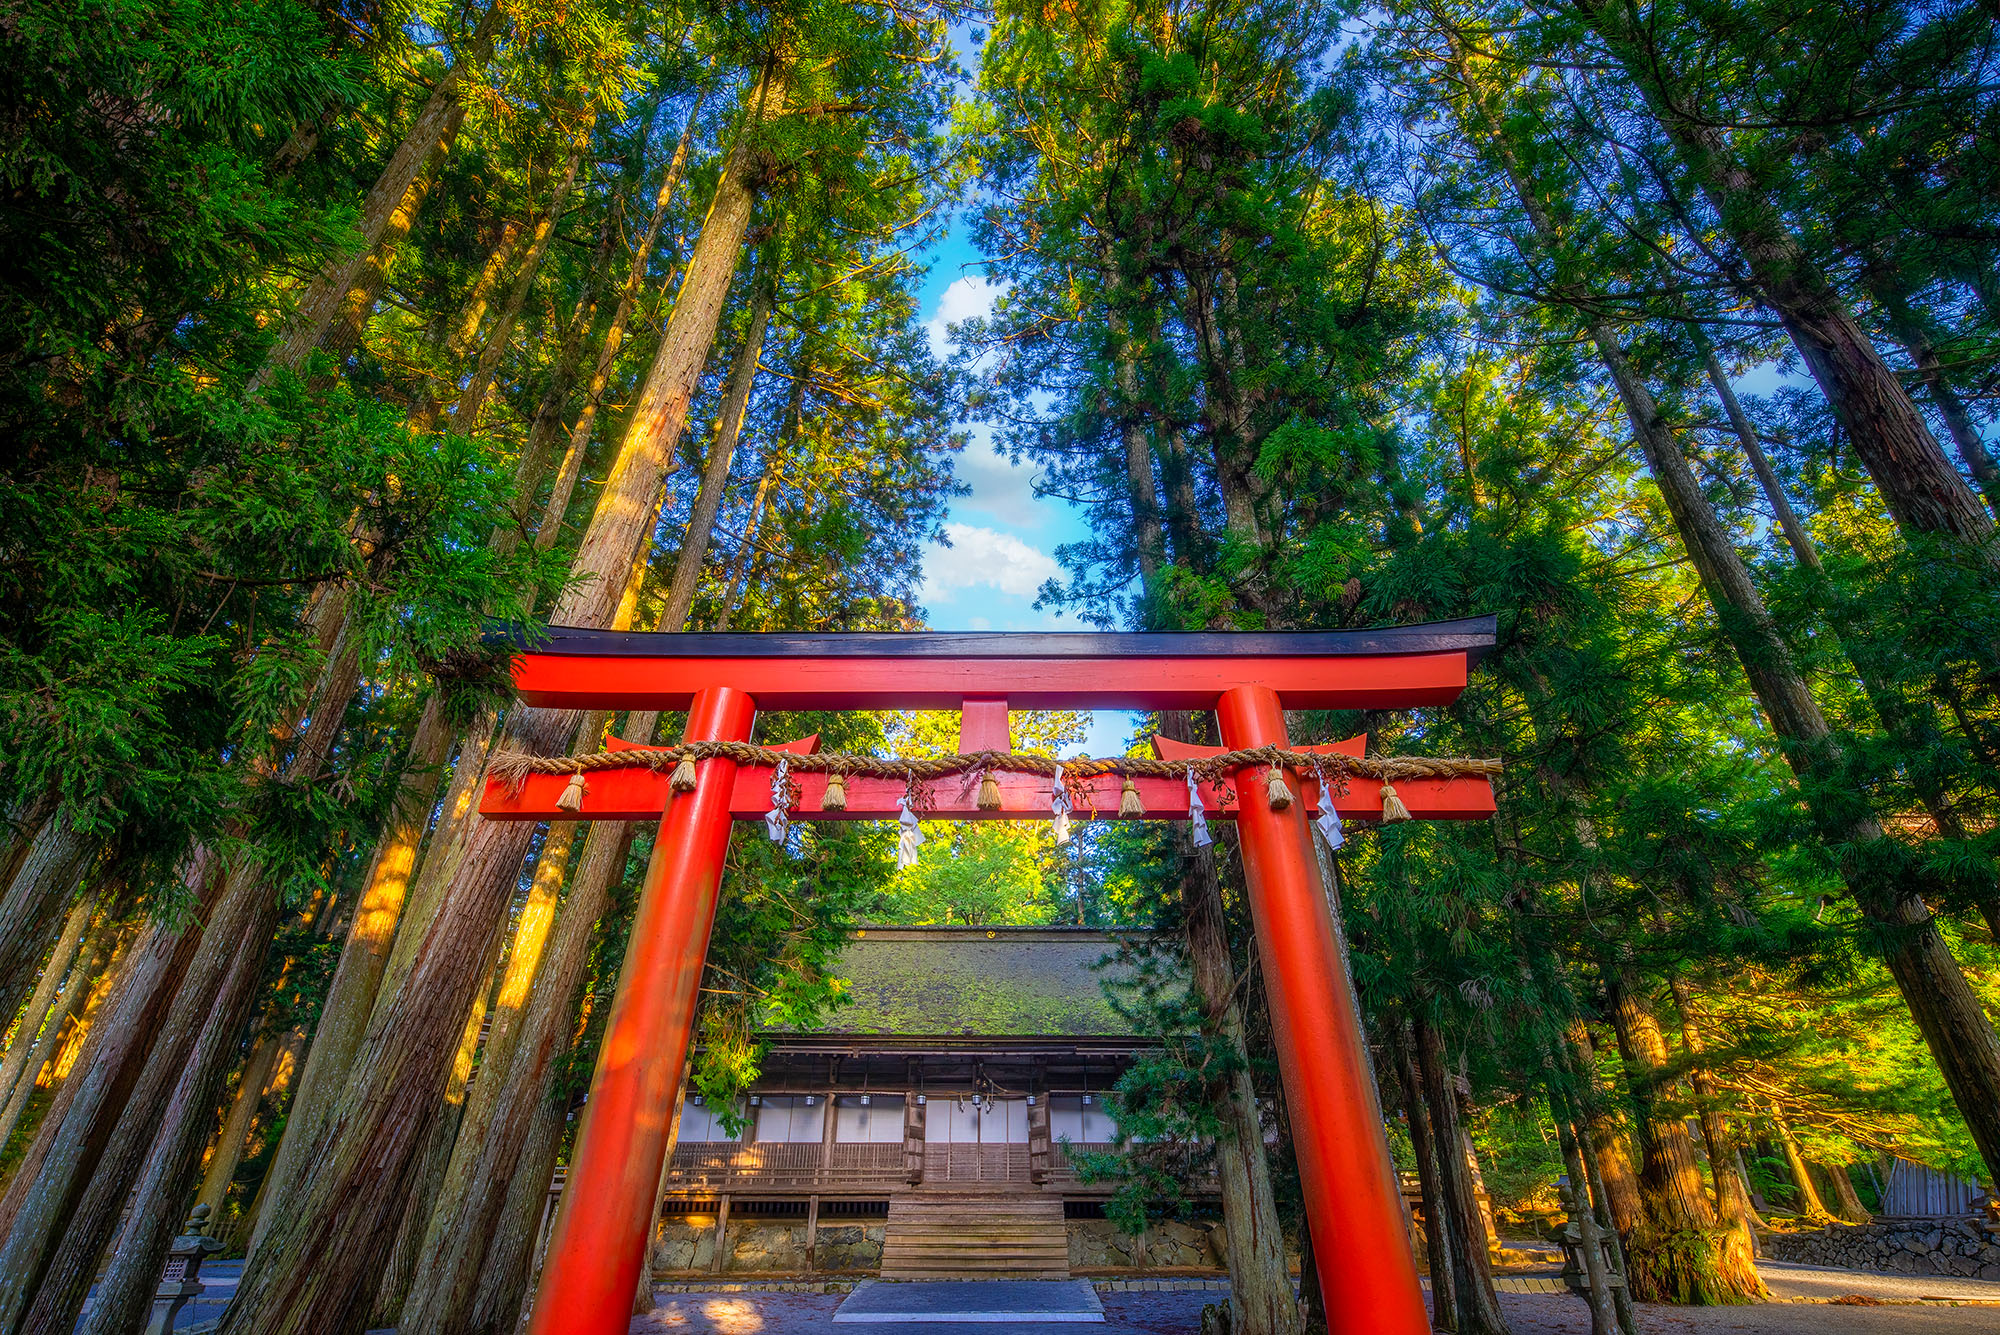 Captured from a unique perspective at ground level, this image unveils the essence of Koyasan's spiritual enclave. A red tori...